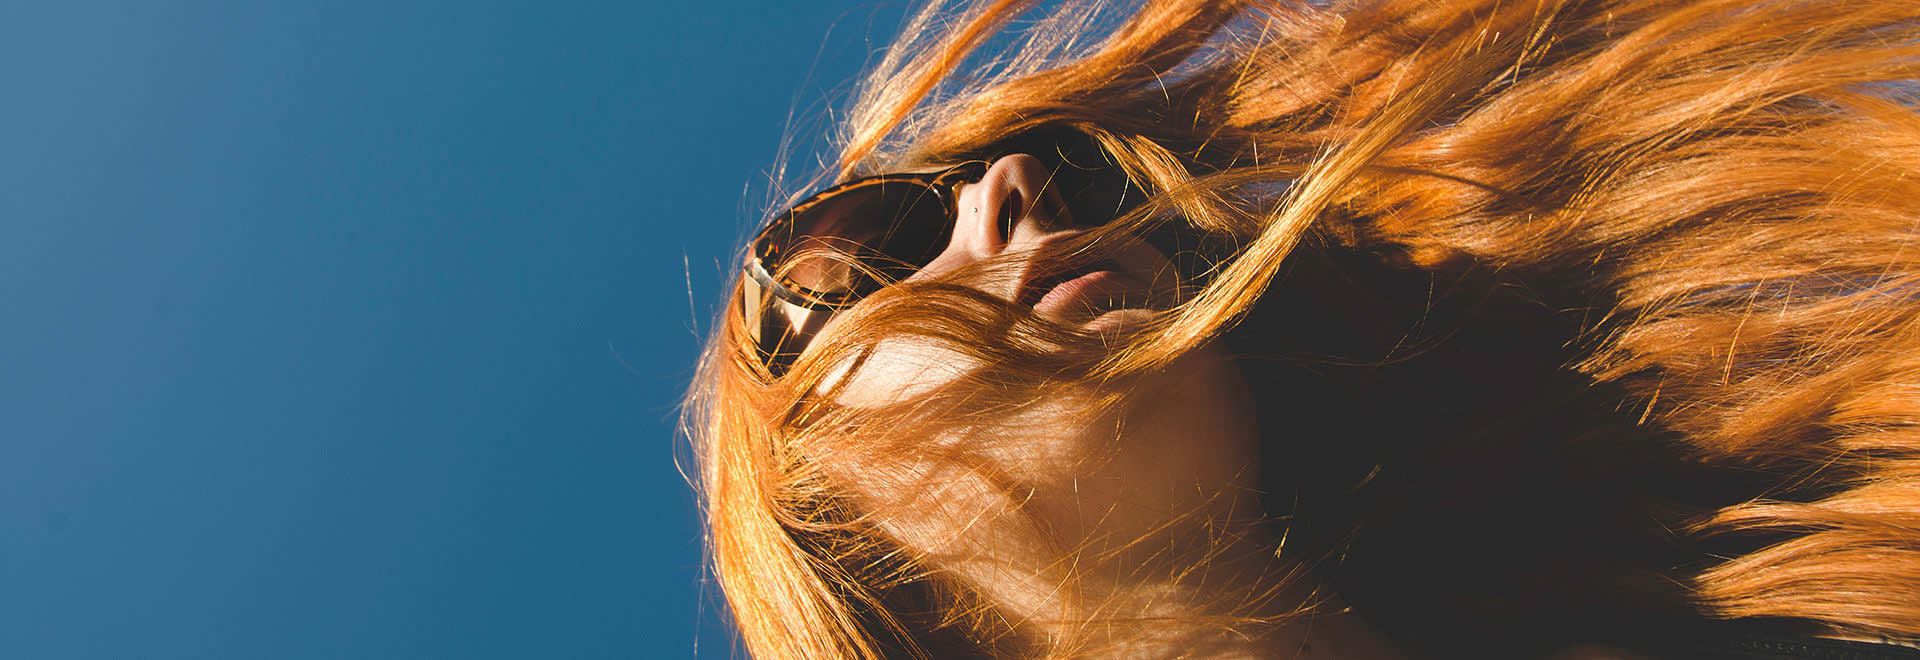 A photo of a woman with long red hair wearing sunglasses on the clear blue sky background - a shot from below 